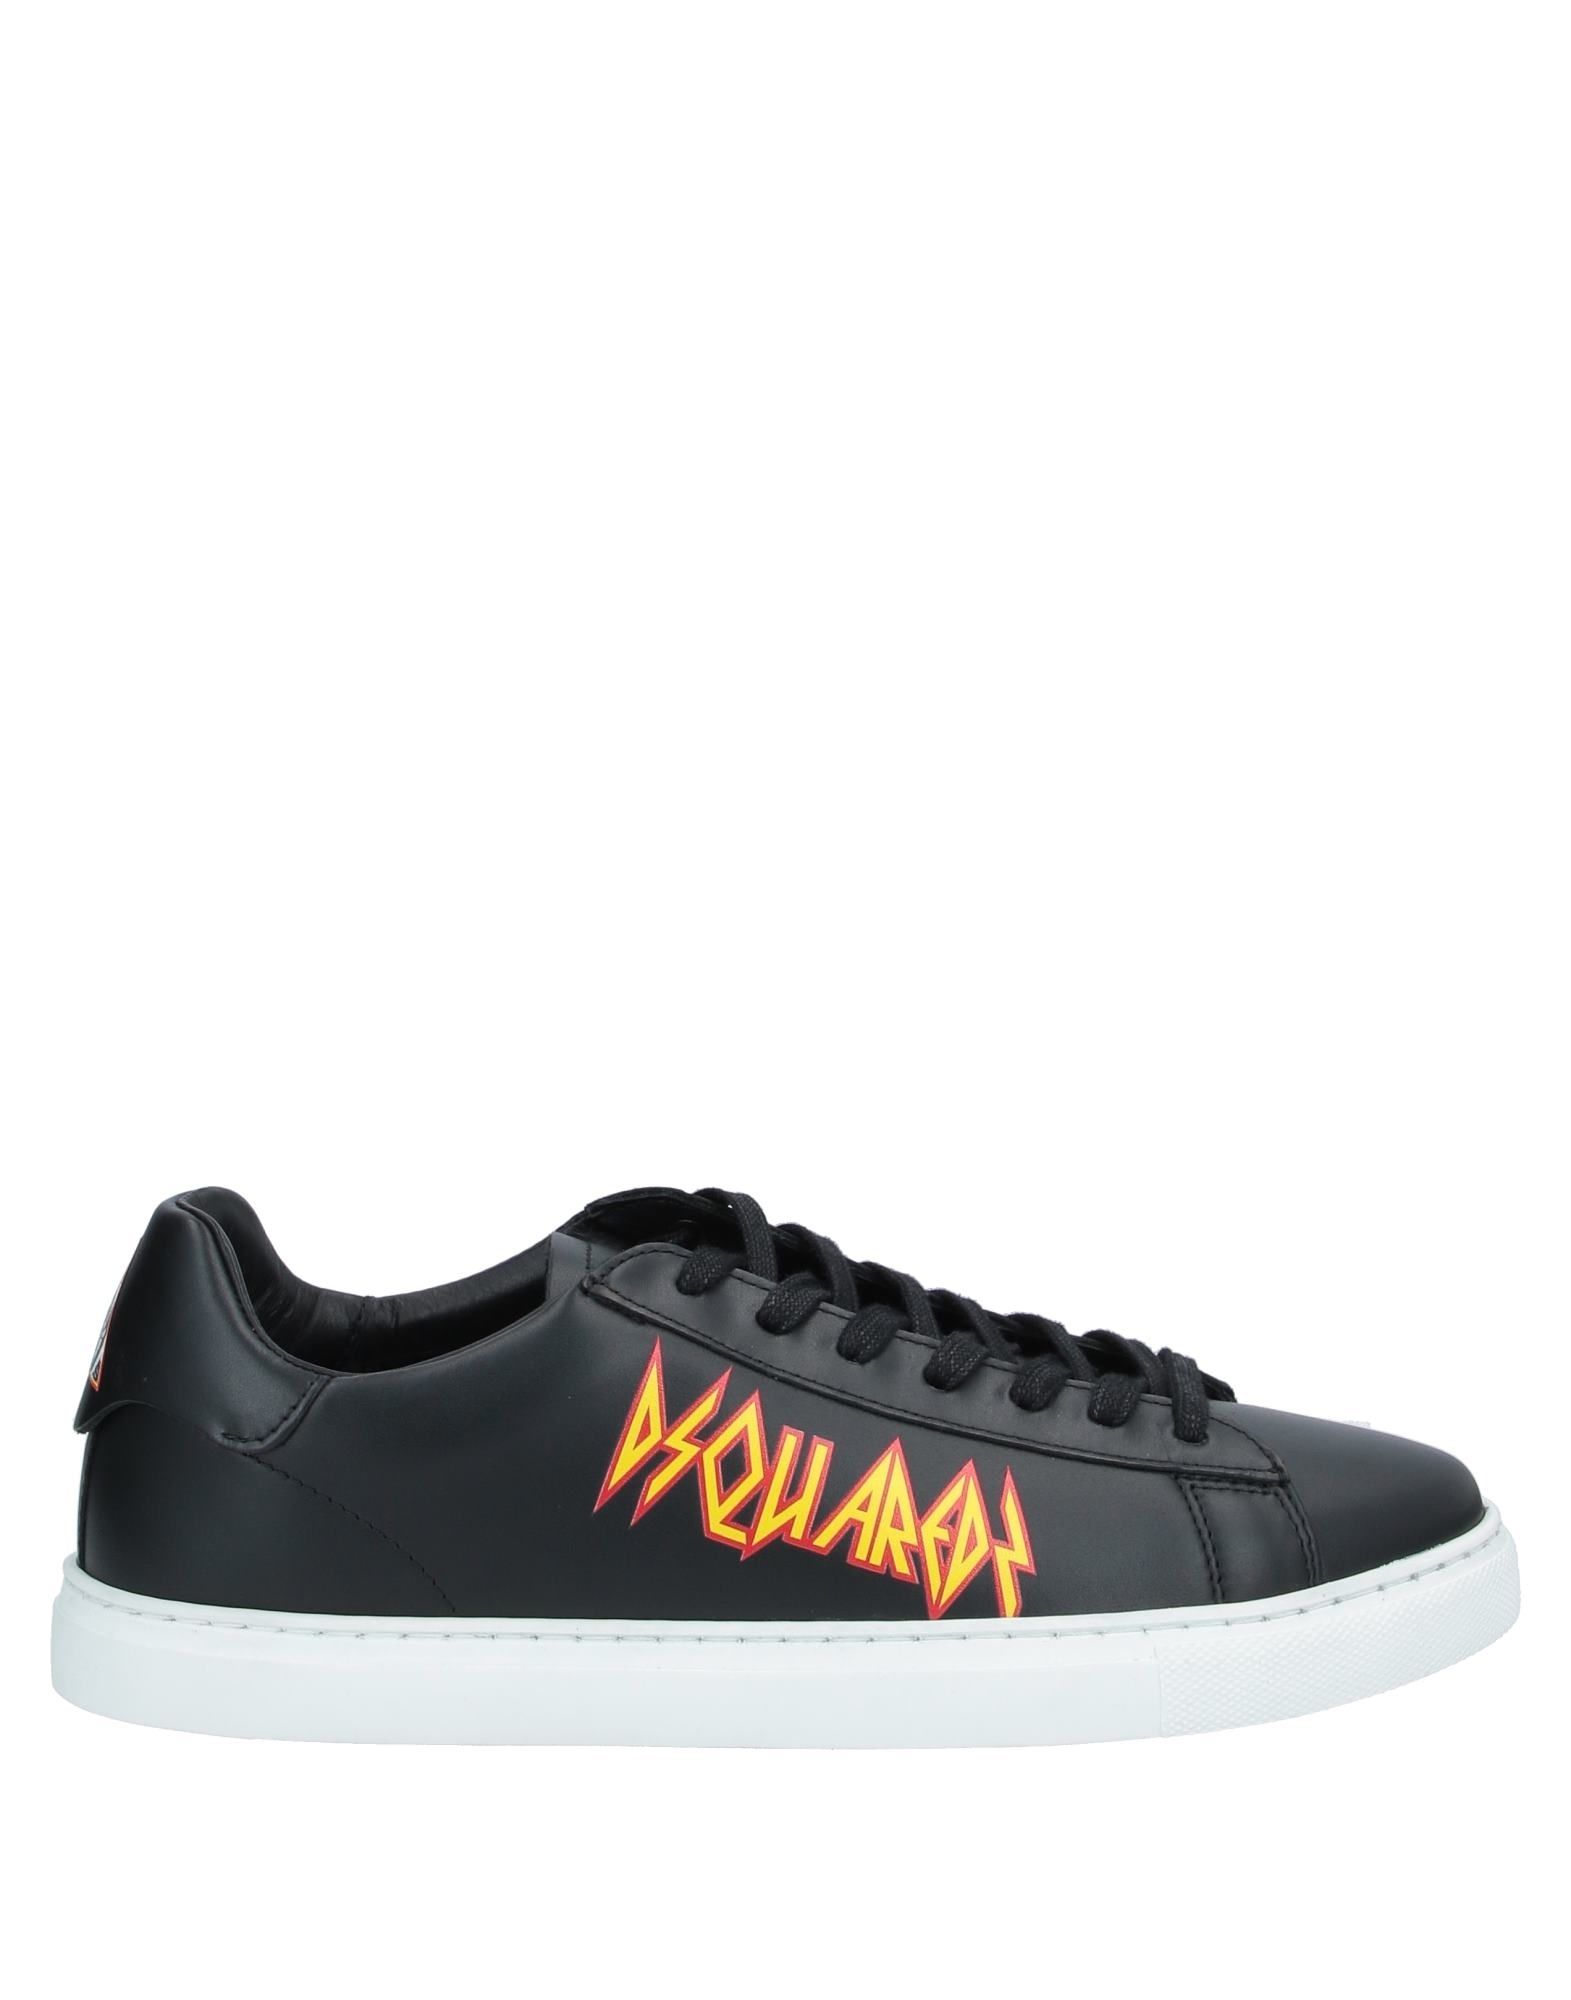 DSQUARED2 Low-tops & sneakers - Item 11936199